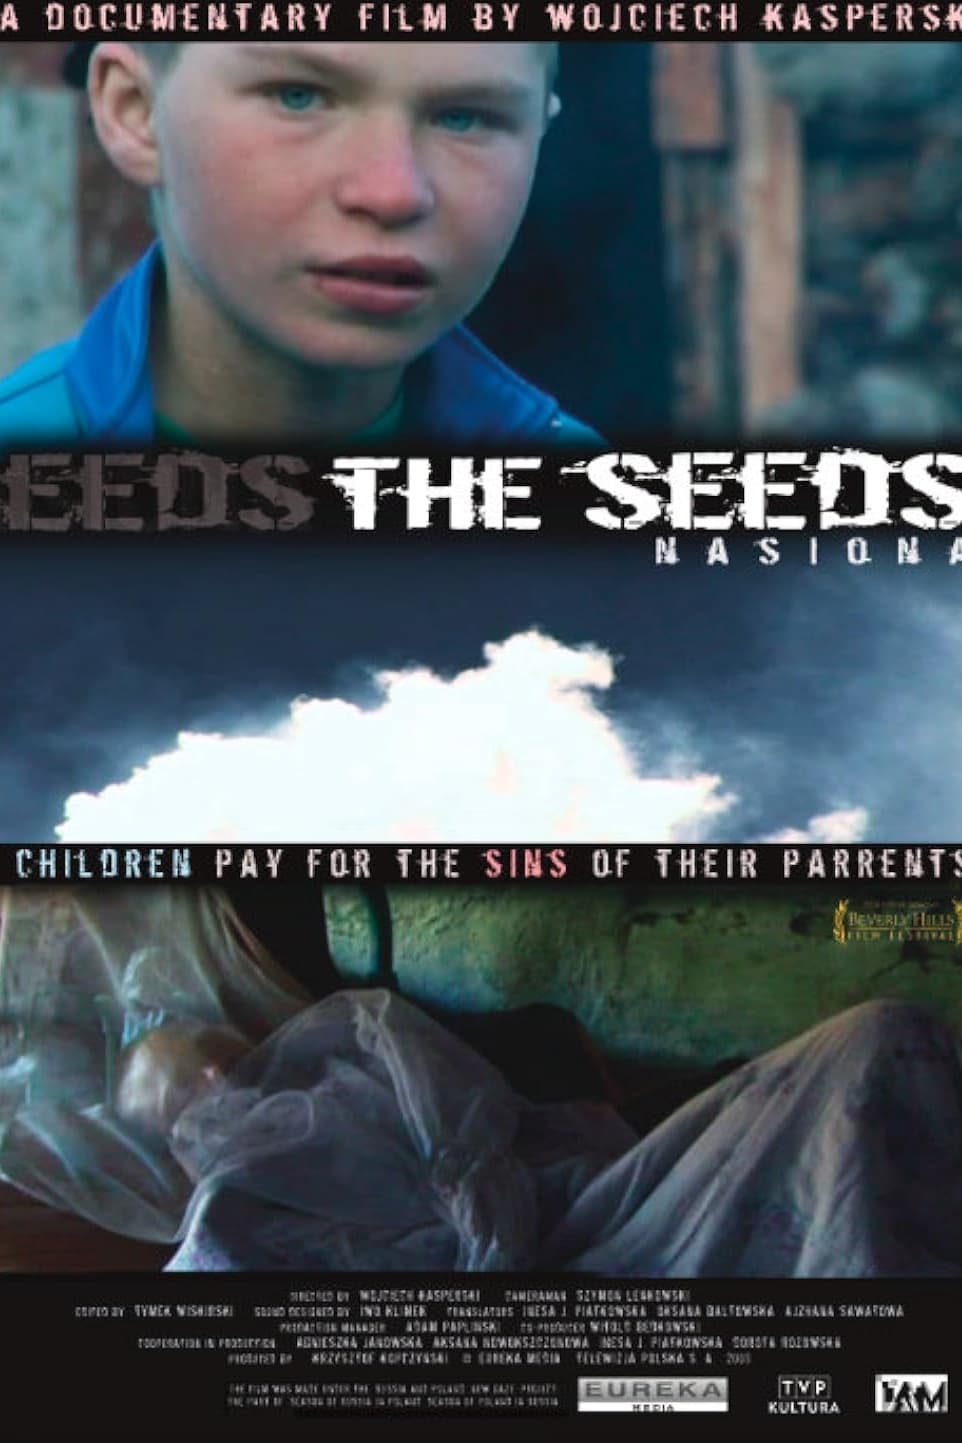 The Seeds